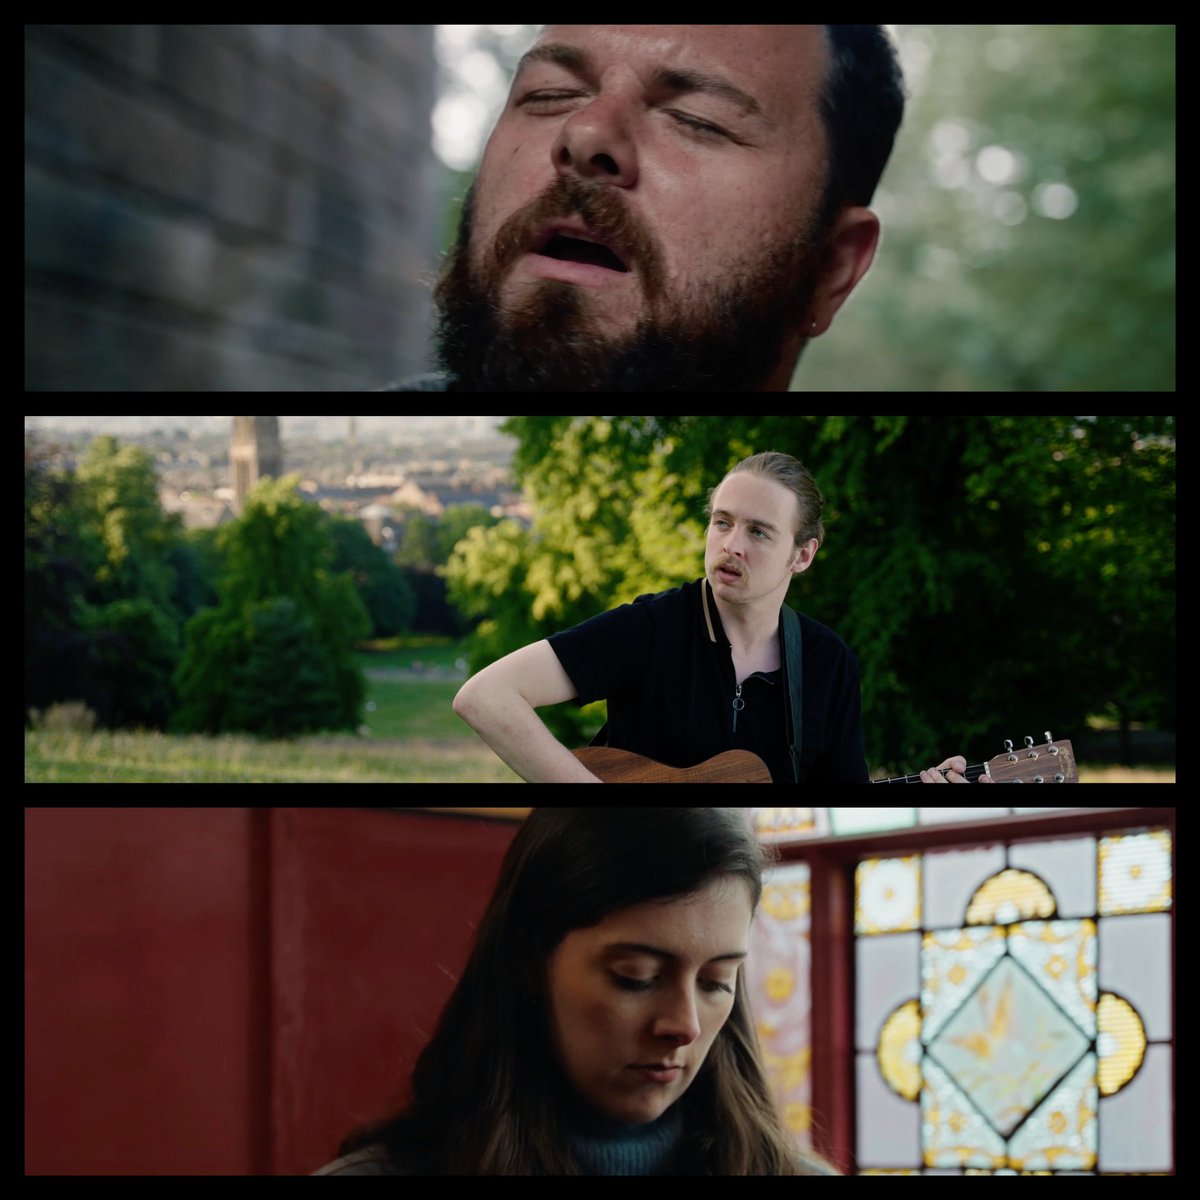 1. Recent music project with @thirteen_north 
2. Some of our side project, The Close Sessions, from over the years - @manoftheminch, Young Kieran, @Rhonamacfarlane 

#videoproductioncompany #timetofilm #a7sIII #sonya7sIII #screenshots #screengrab #screengrabs #frames #stills